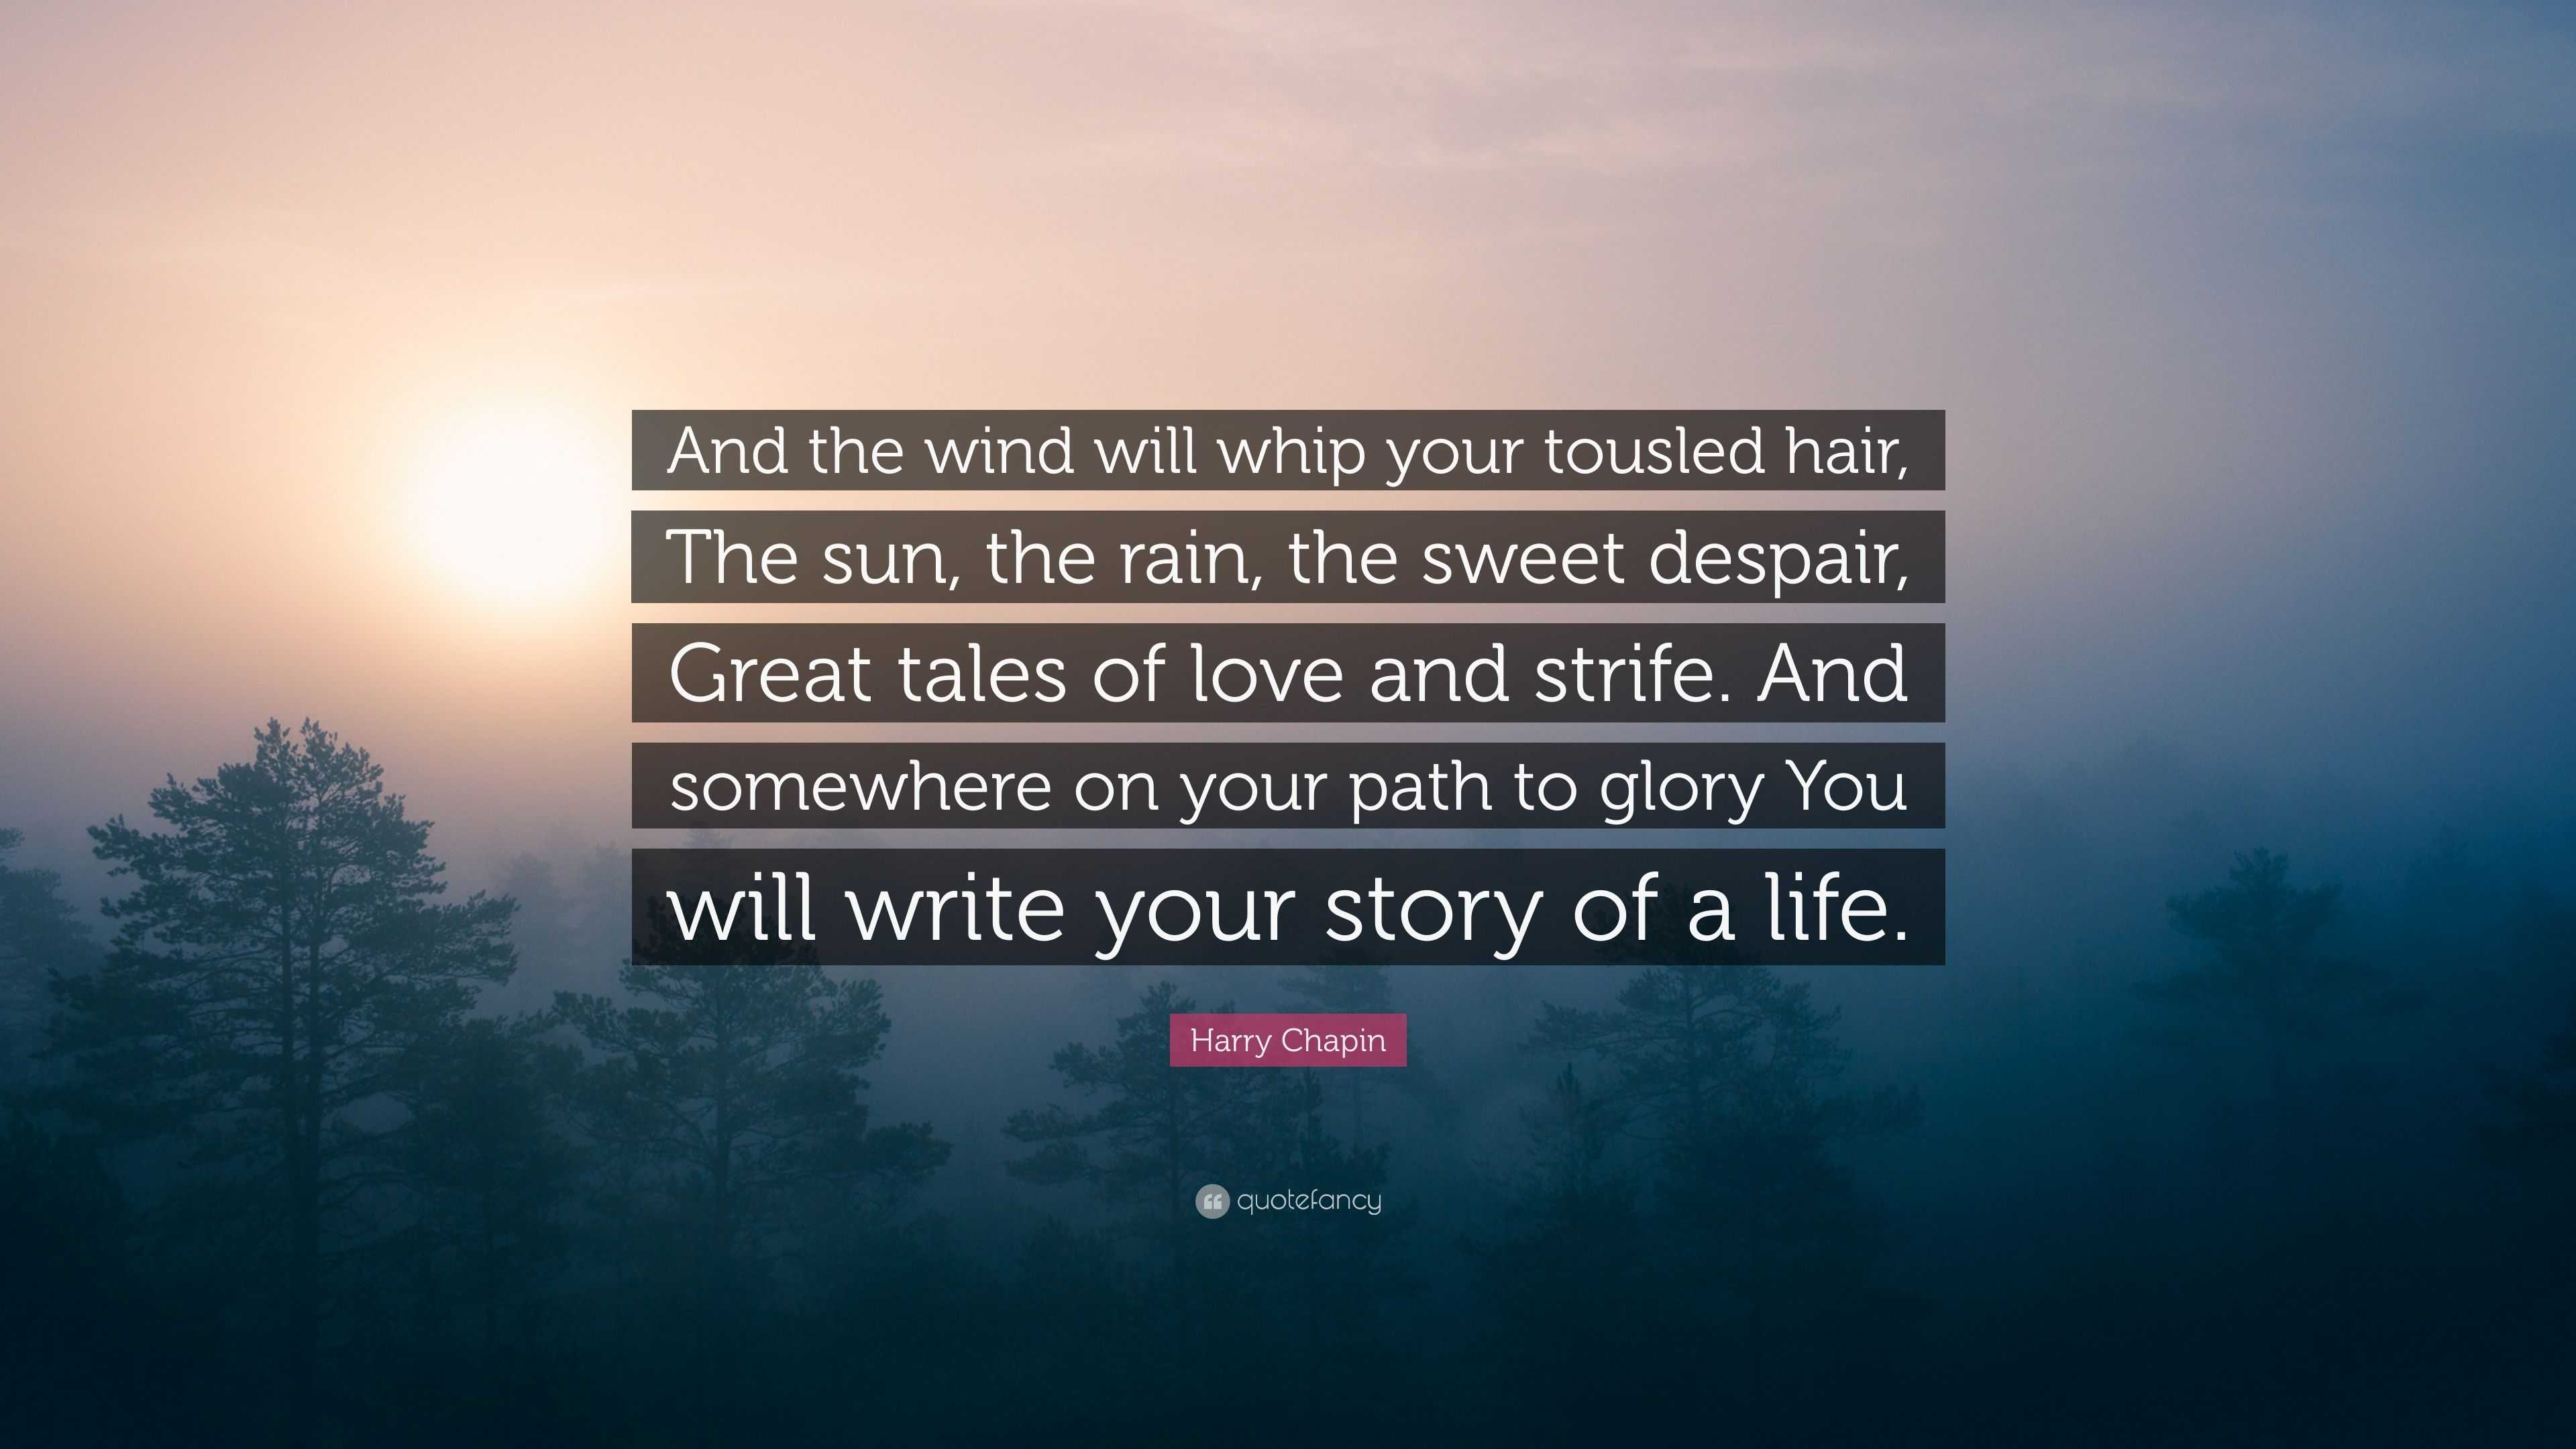 Harry Chapin Quote: “And the wind will whip your tousled hair, The sun, the  rain, the sweet despair, Great tales of love and strife. And some...”